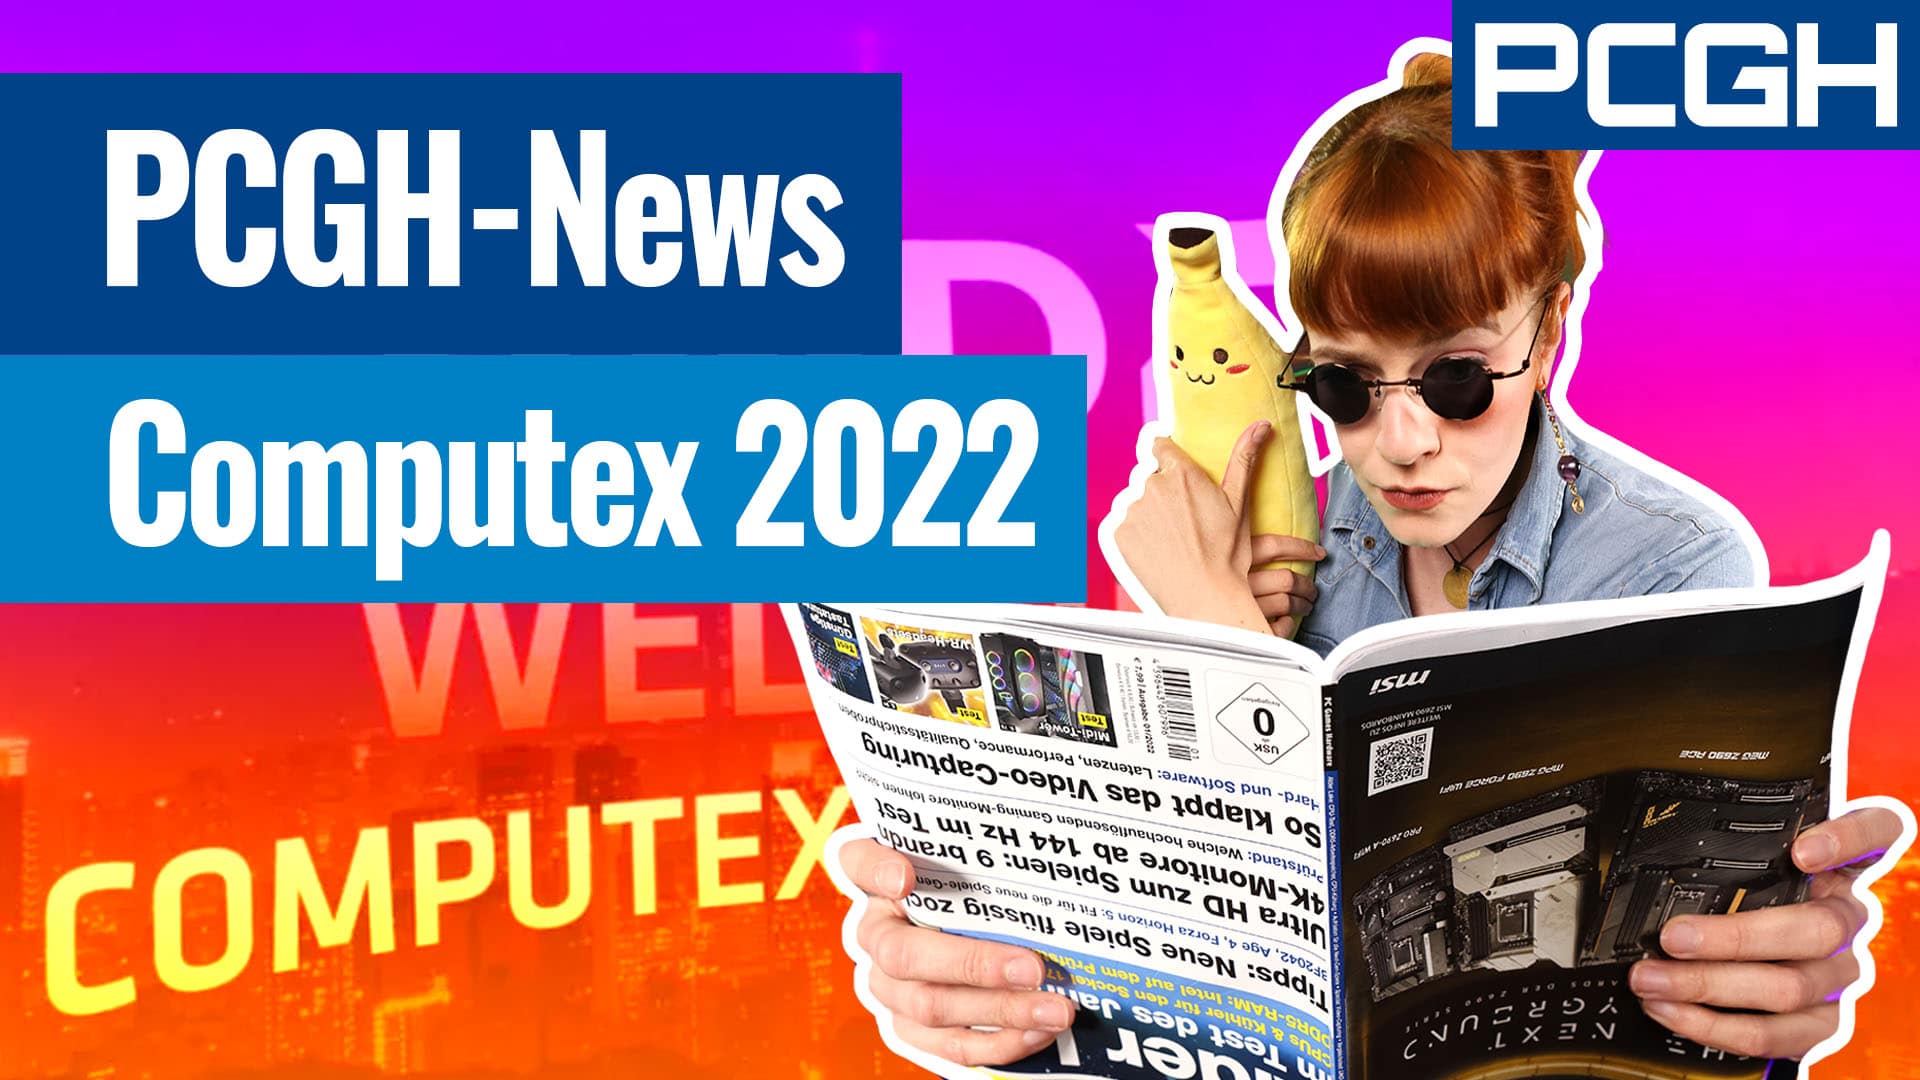 PCGH-News 05/27: The most important announcements of Computex 2022: AMD, Nvidia and more